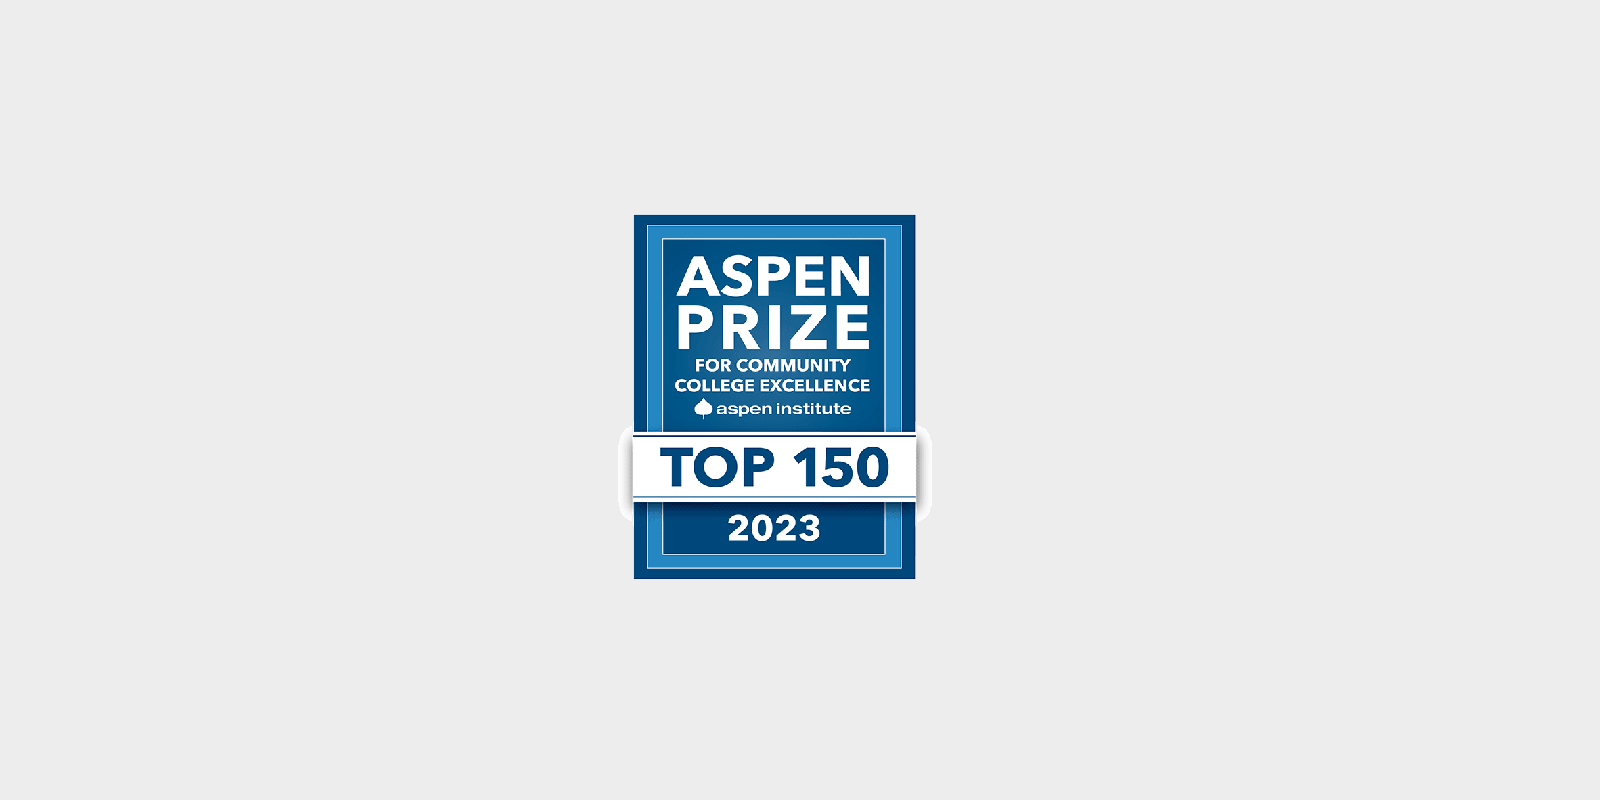 Aspen Prize for Community College Excellence, Top 150, 2023